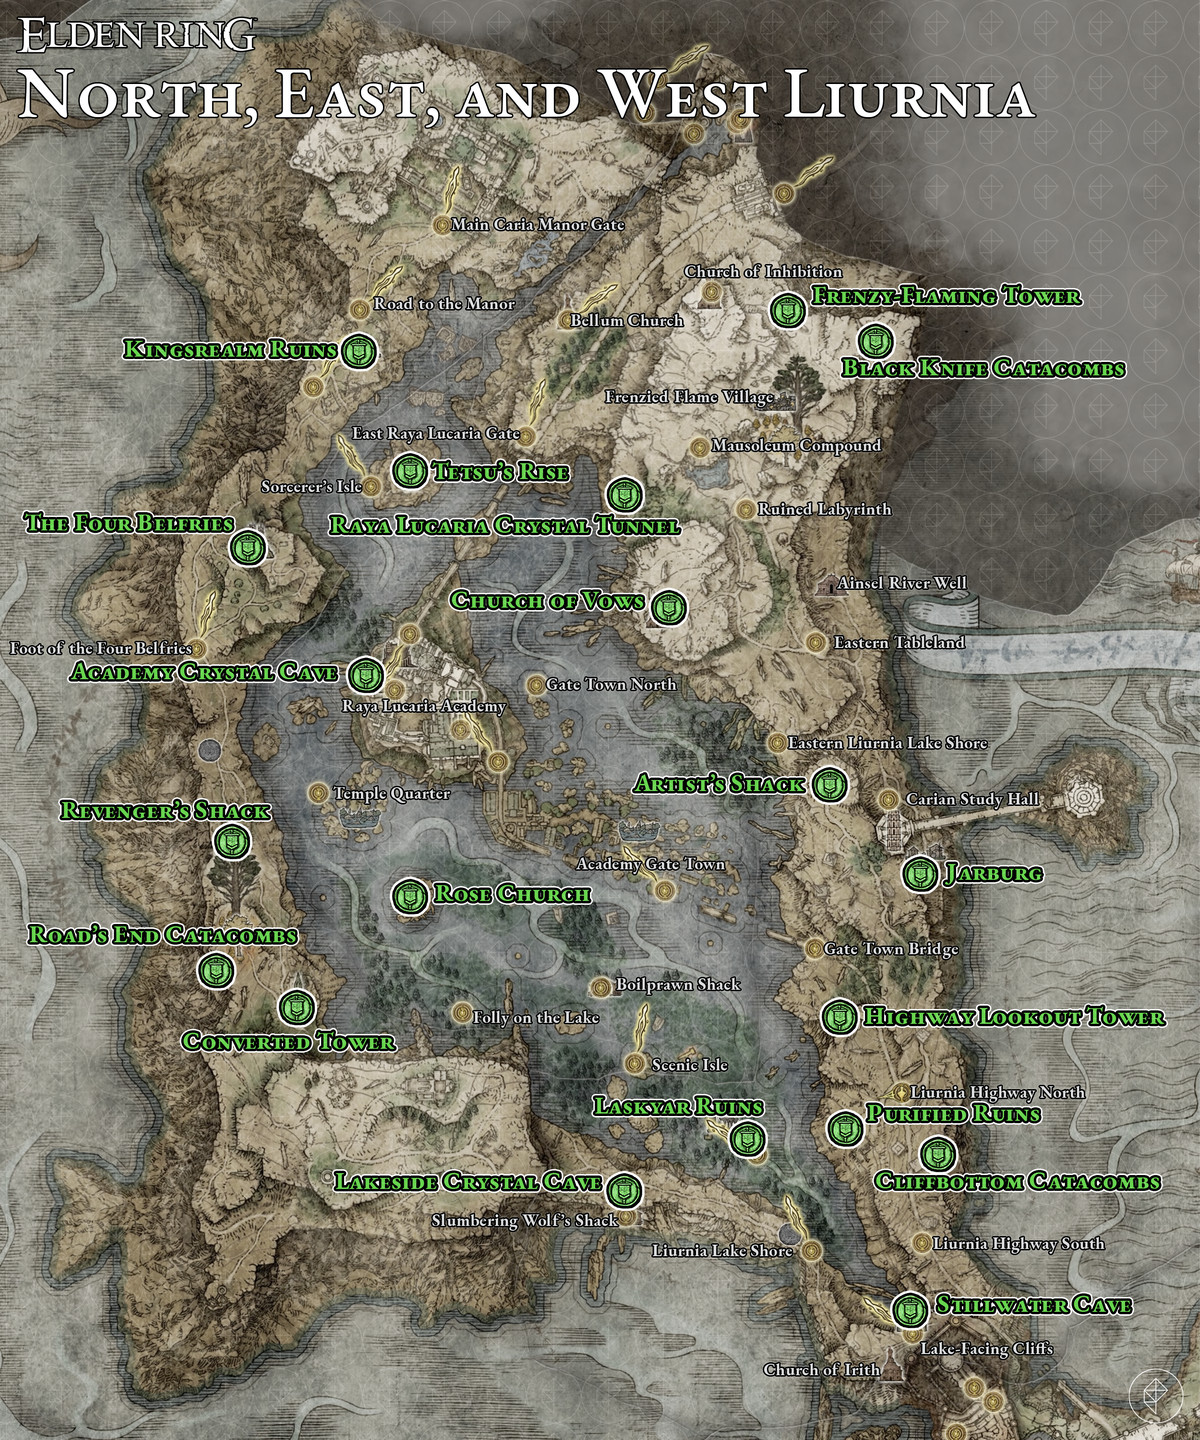 Elden Ring guide: Liurnia dungeon locations and rewards